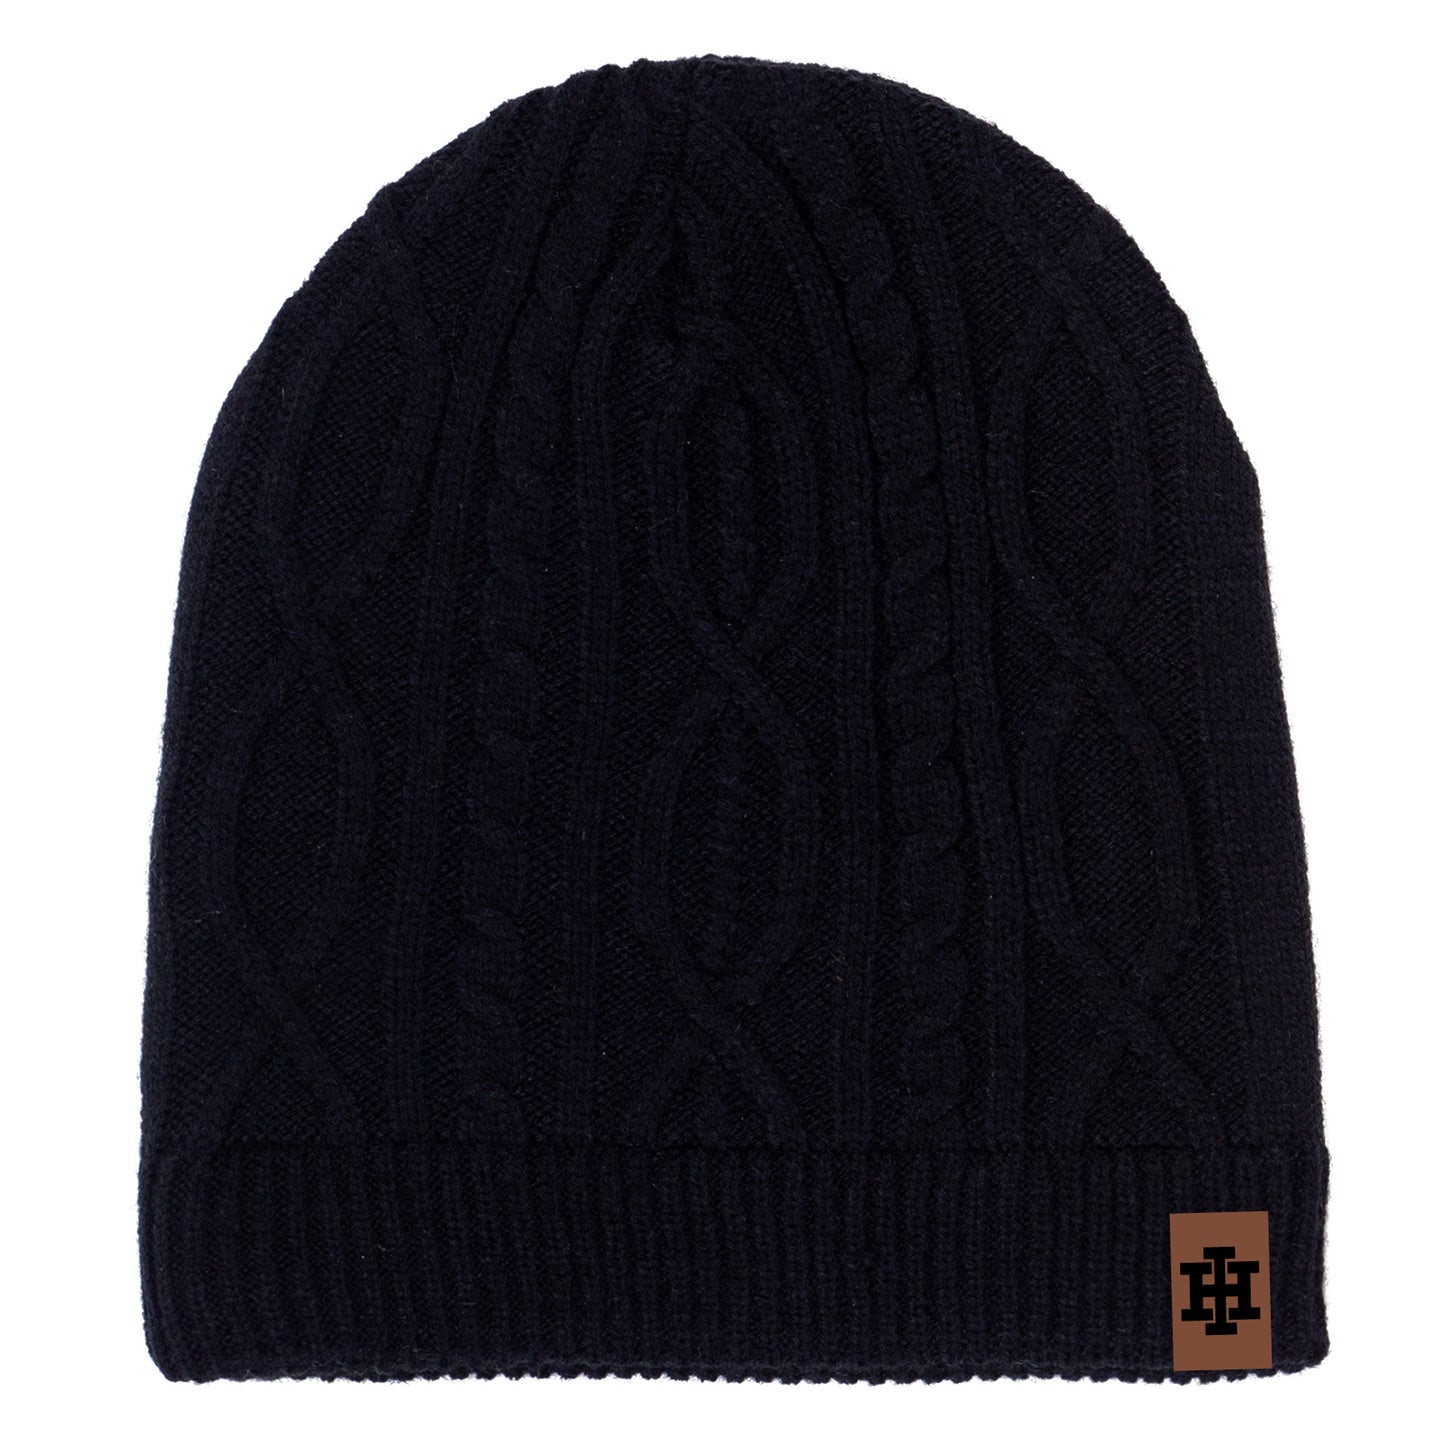 Ouray Cableknit Slouch Beanie - Black